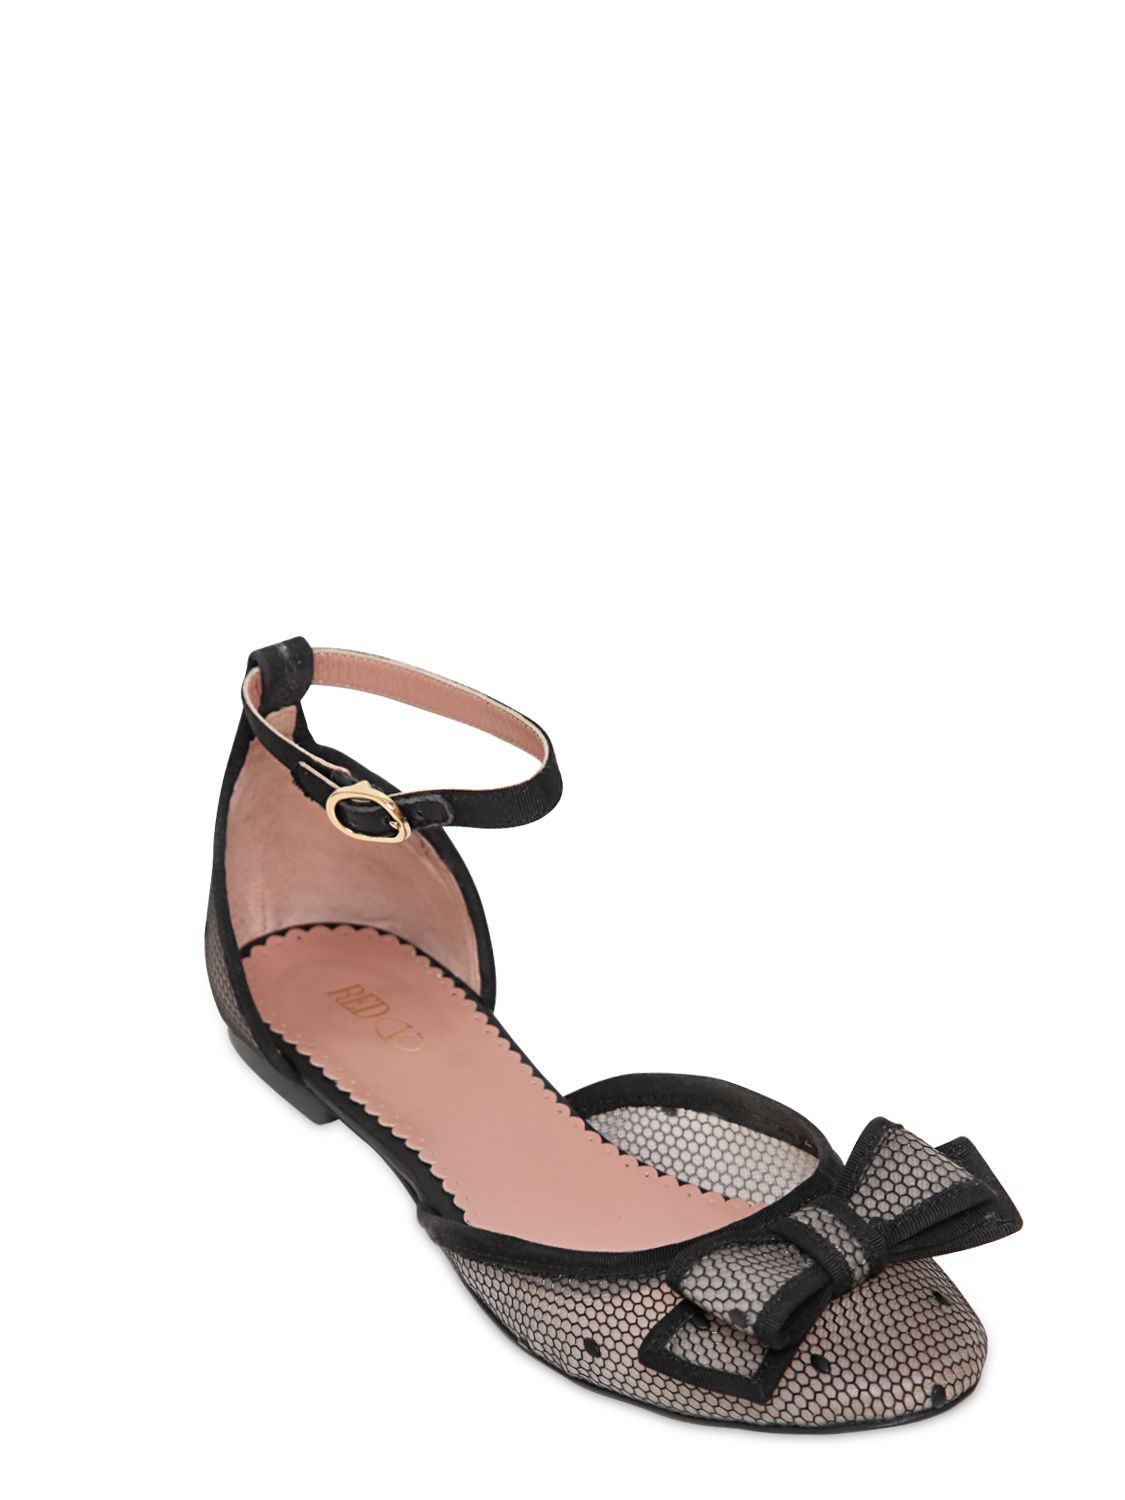 RED Valentino 10mm Rubber Net Bow Flats in Black - Lyst